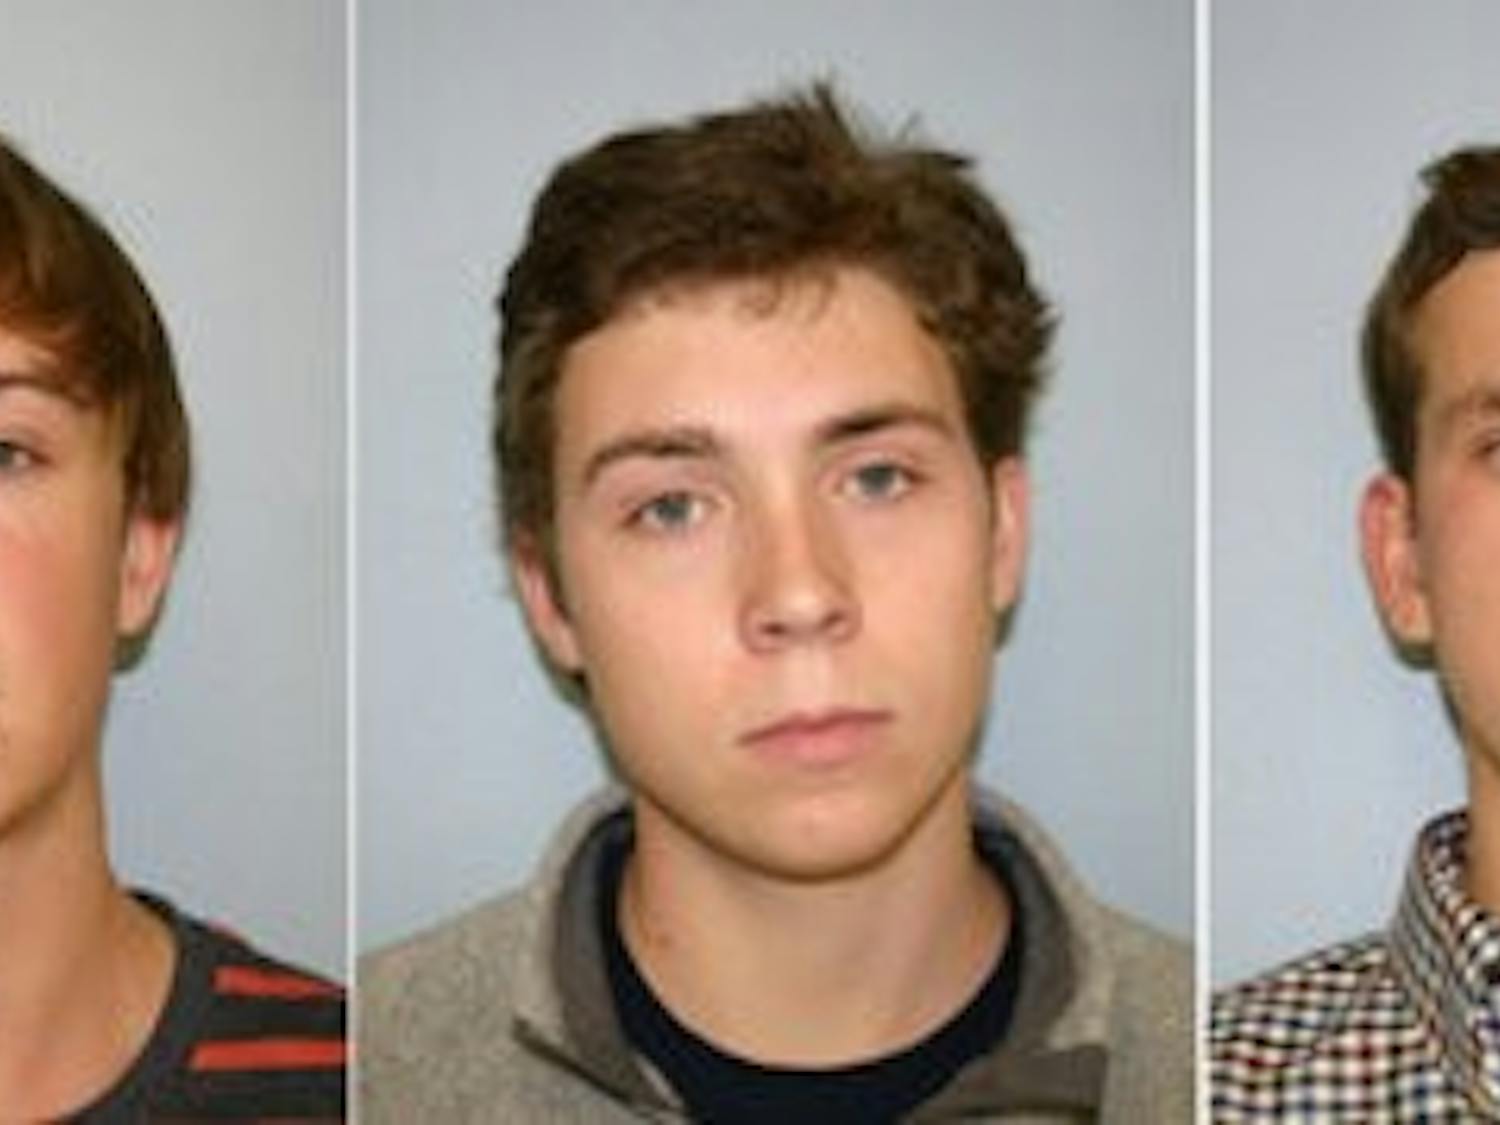 Three freshmen teens arrested for allegedly stealing $13,000 of sports apparel and equipment